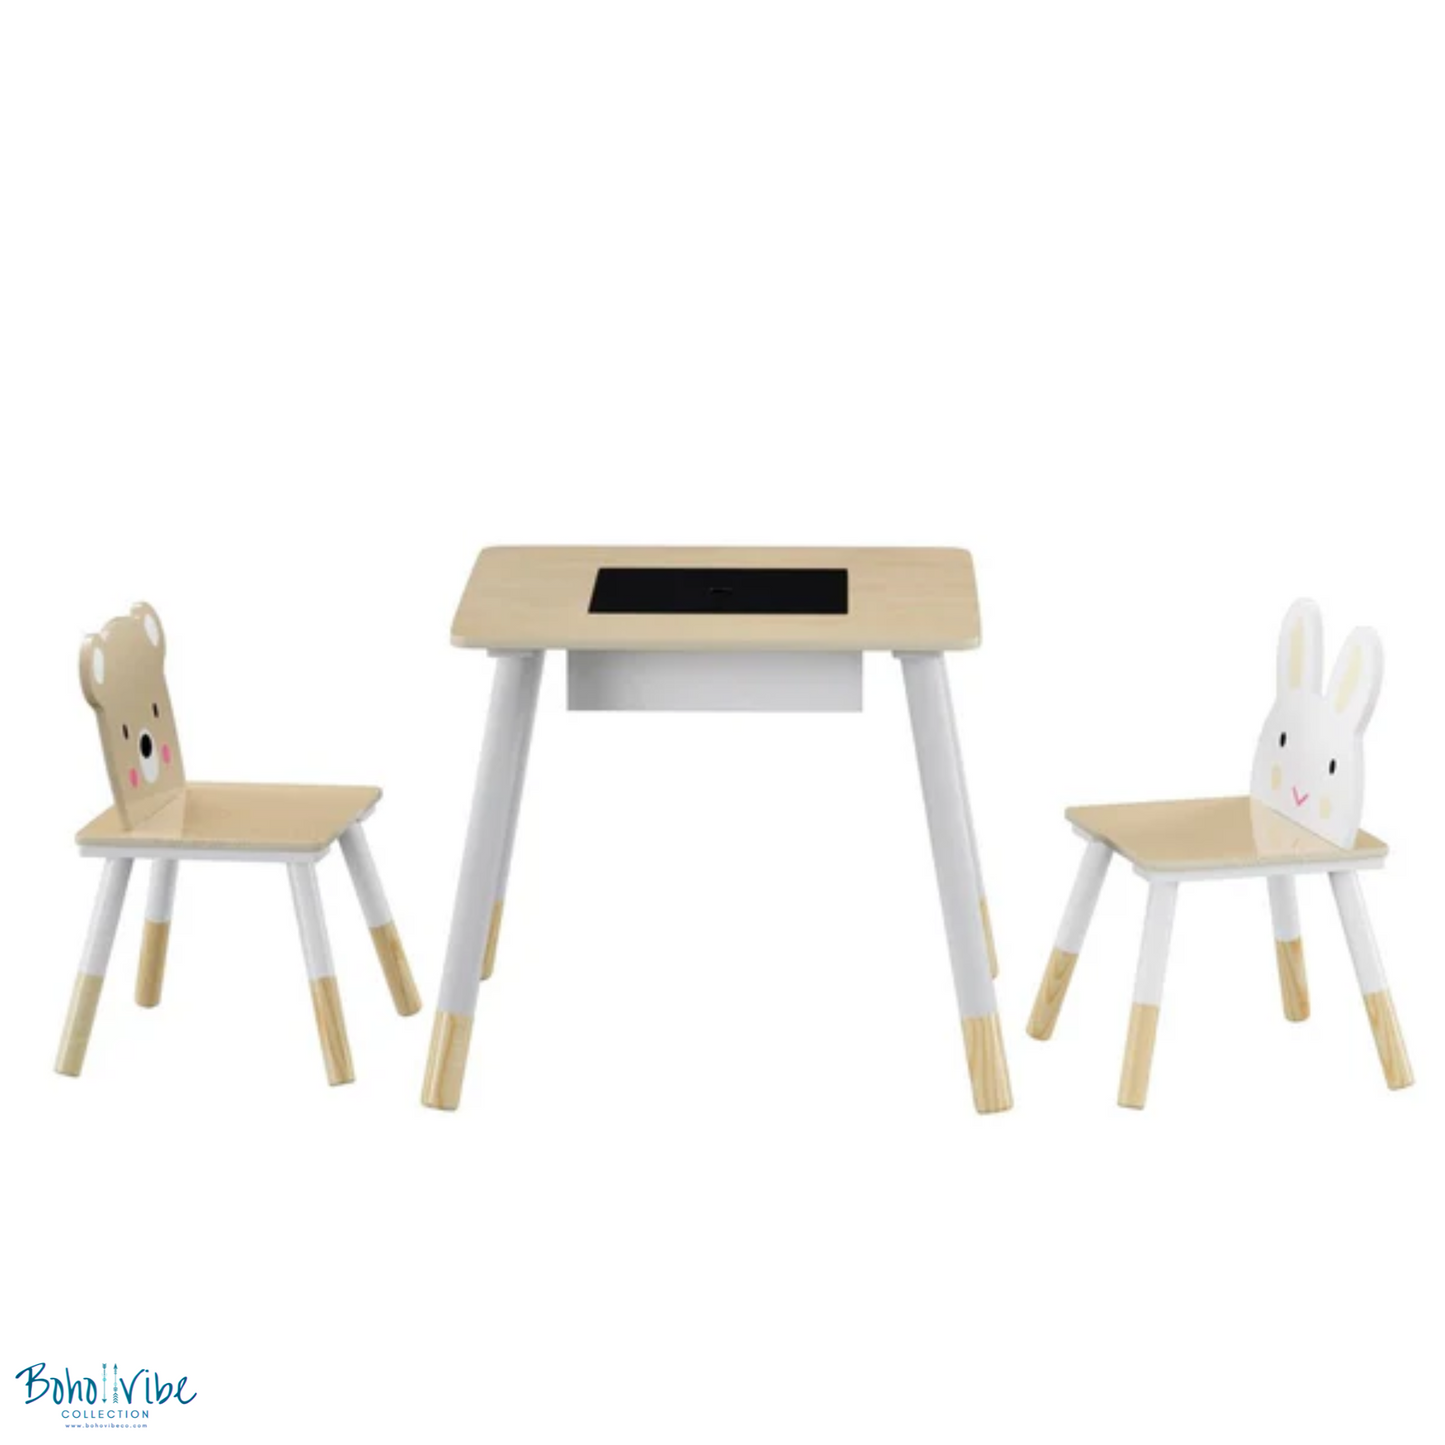 3-Piece Kids Table Chairs Set with Bear & Bunny Chairs, Play Study Desk ↡